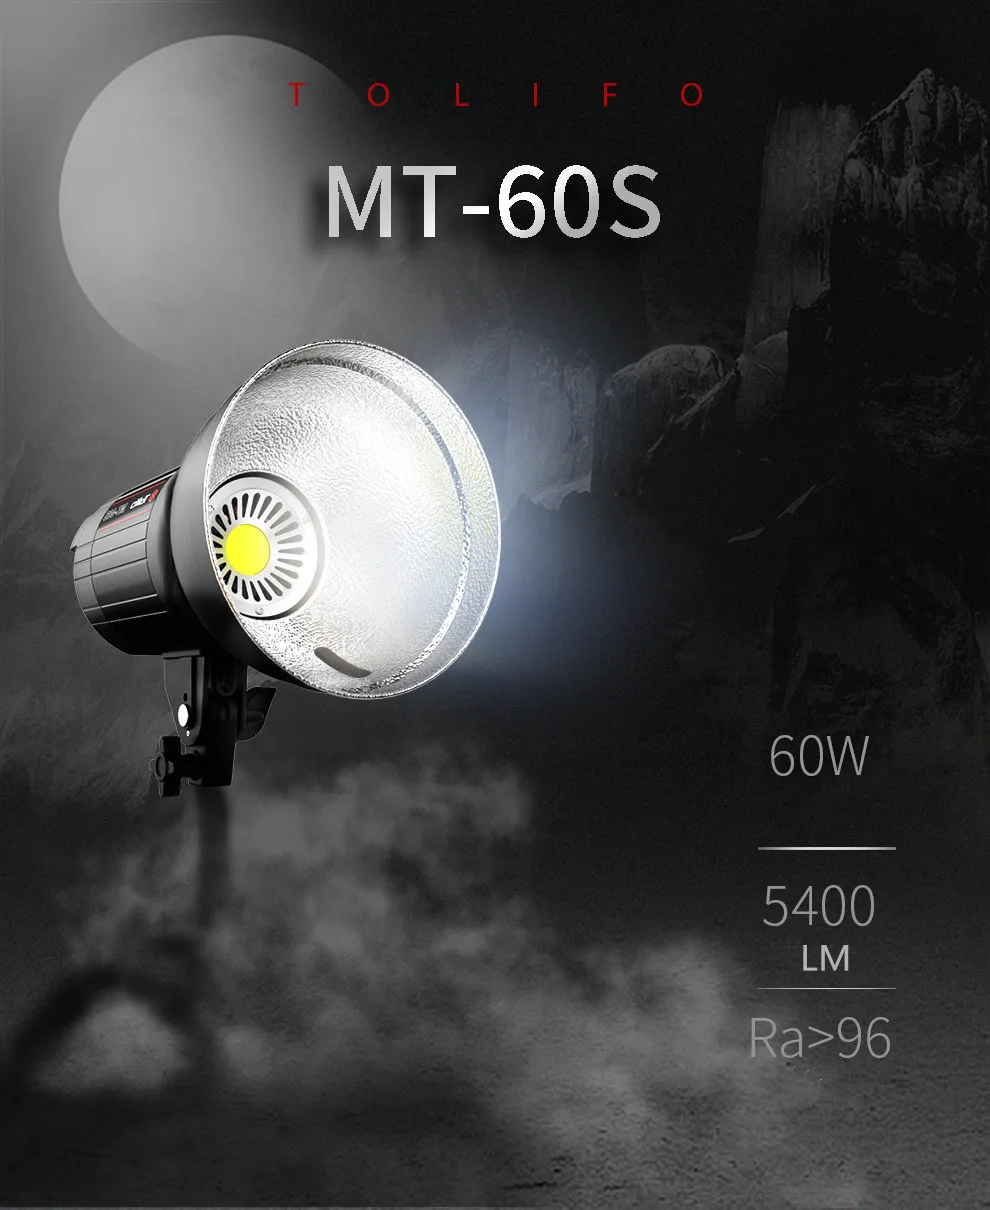 60W LED Light White 5600K Version Continuous Lighting Bowens Mount for Film Video Lighting Shooting with Standard Reflector and 2.4G Remote Control Neewer Photography LED Video Light Kit CRI 95 